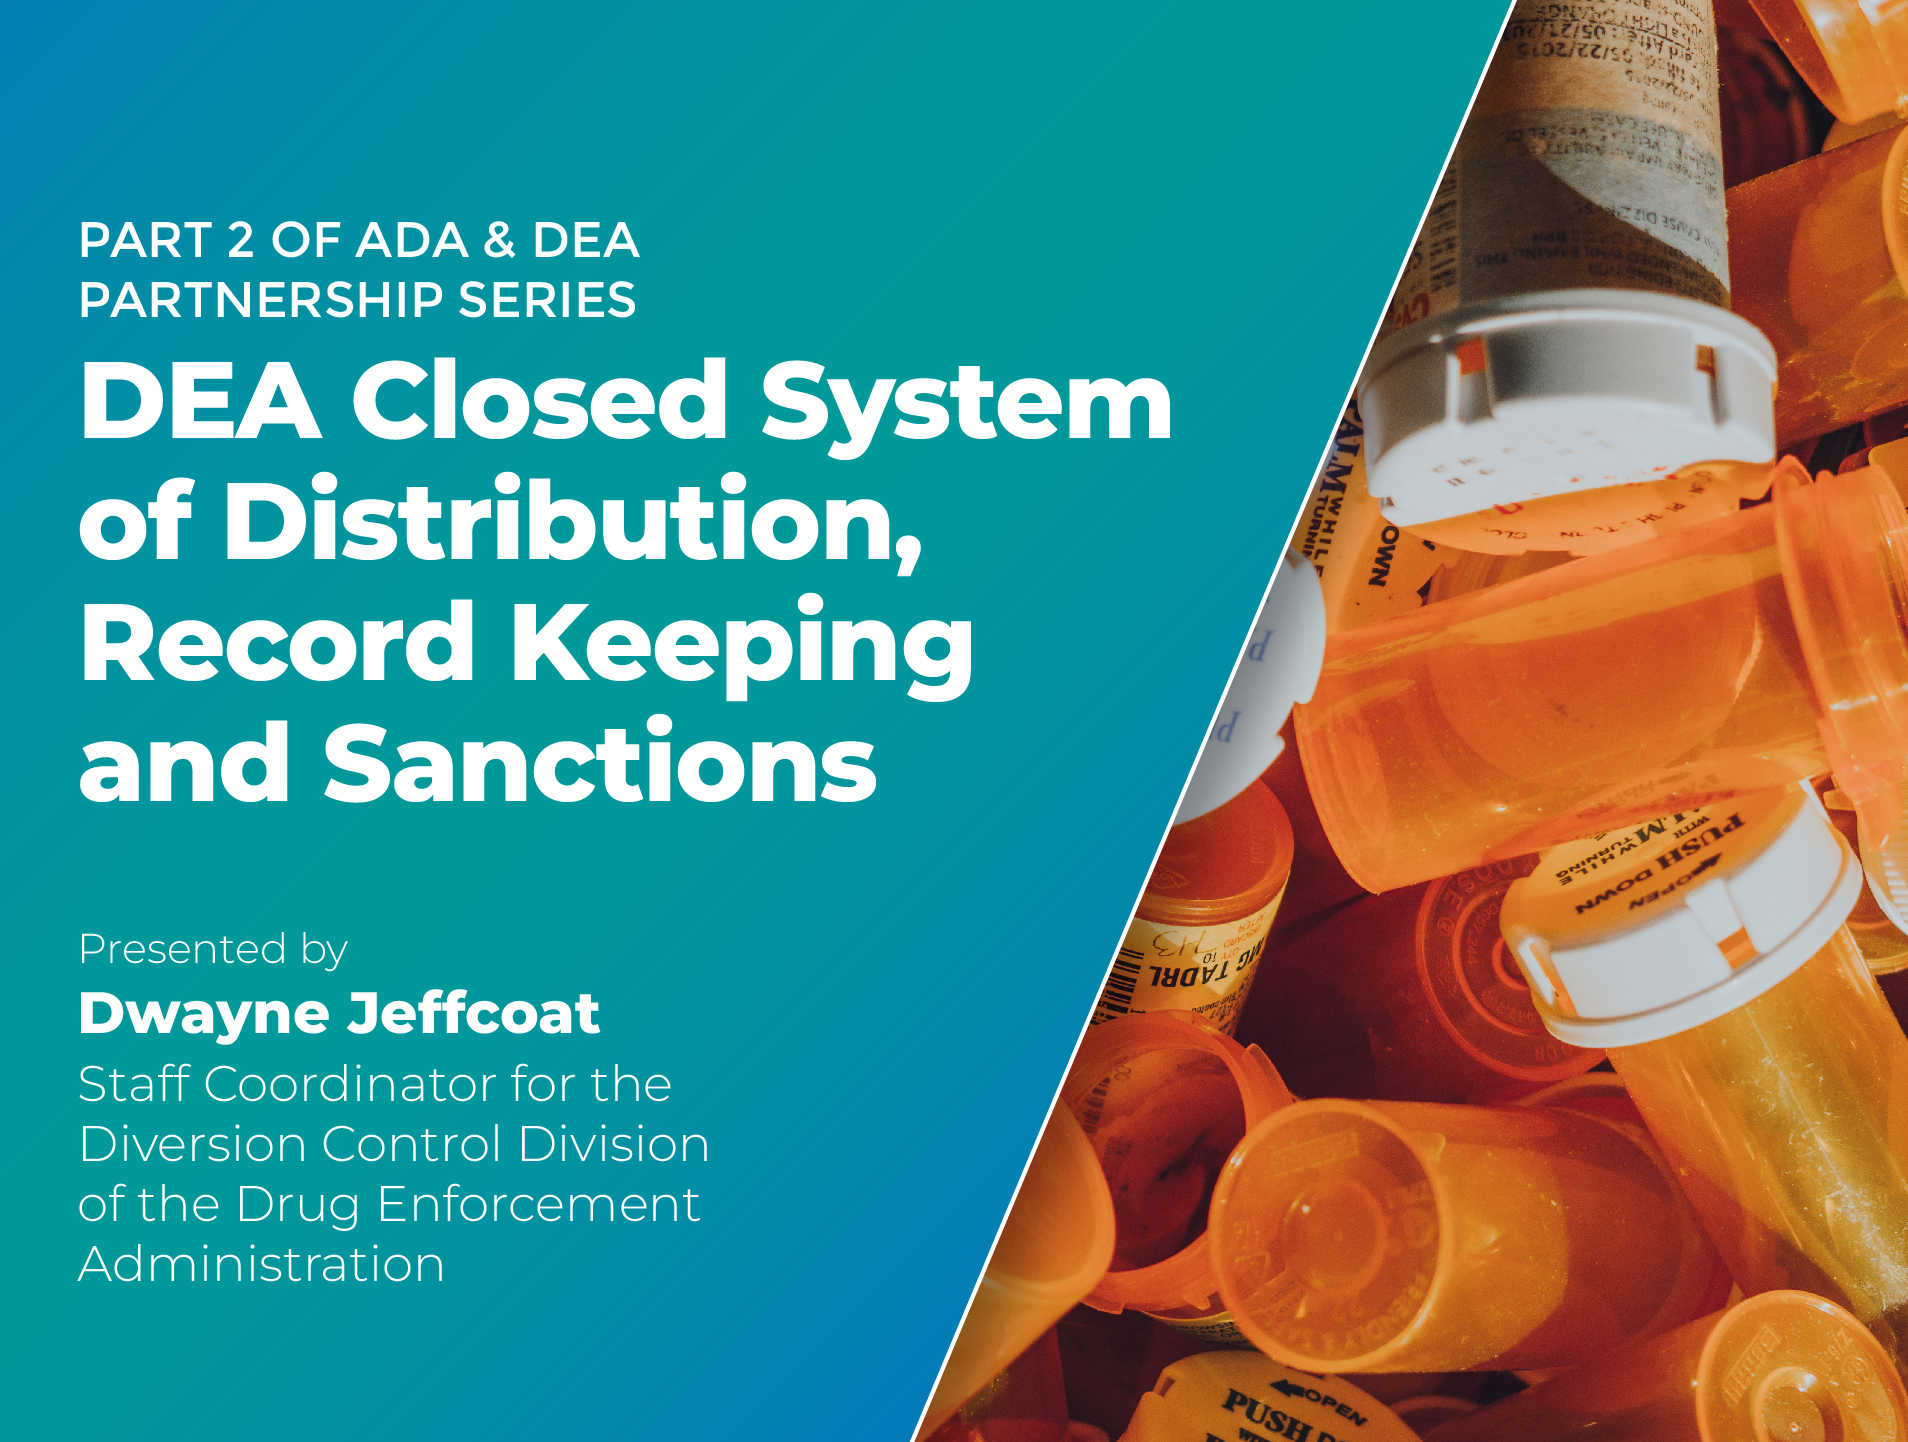 DEA Closed System of Distribution, Record Keeping and Sanctions (Part 2 of ADA & DEA Series)